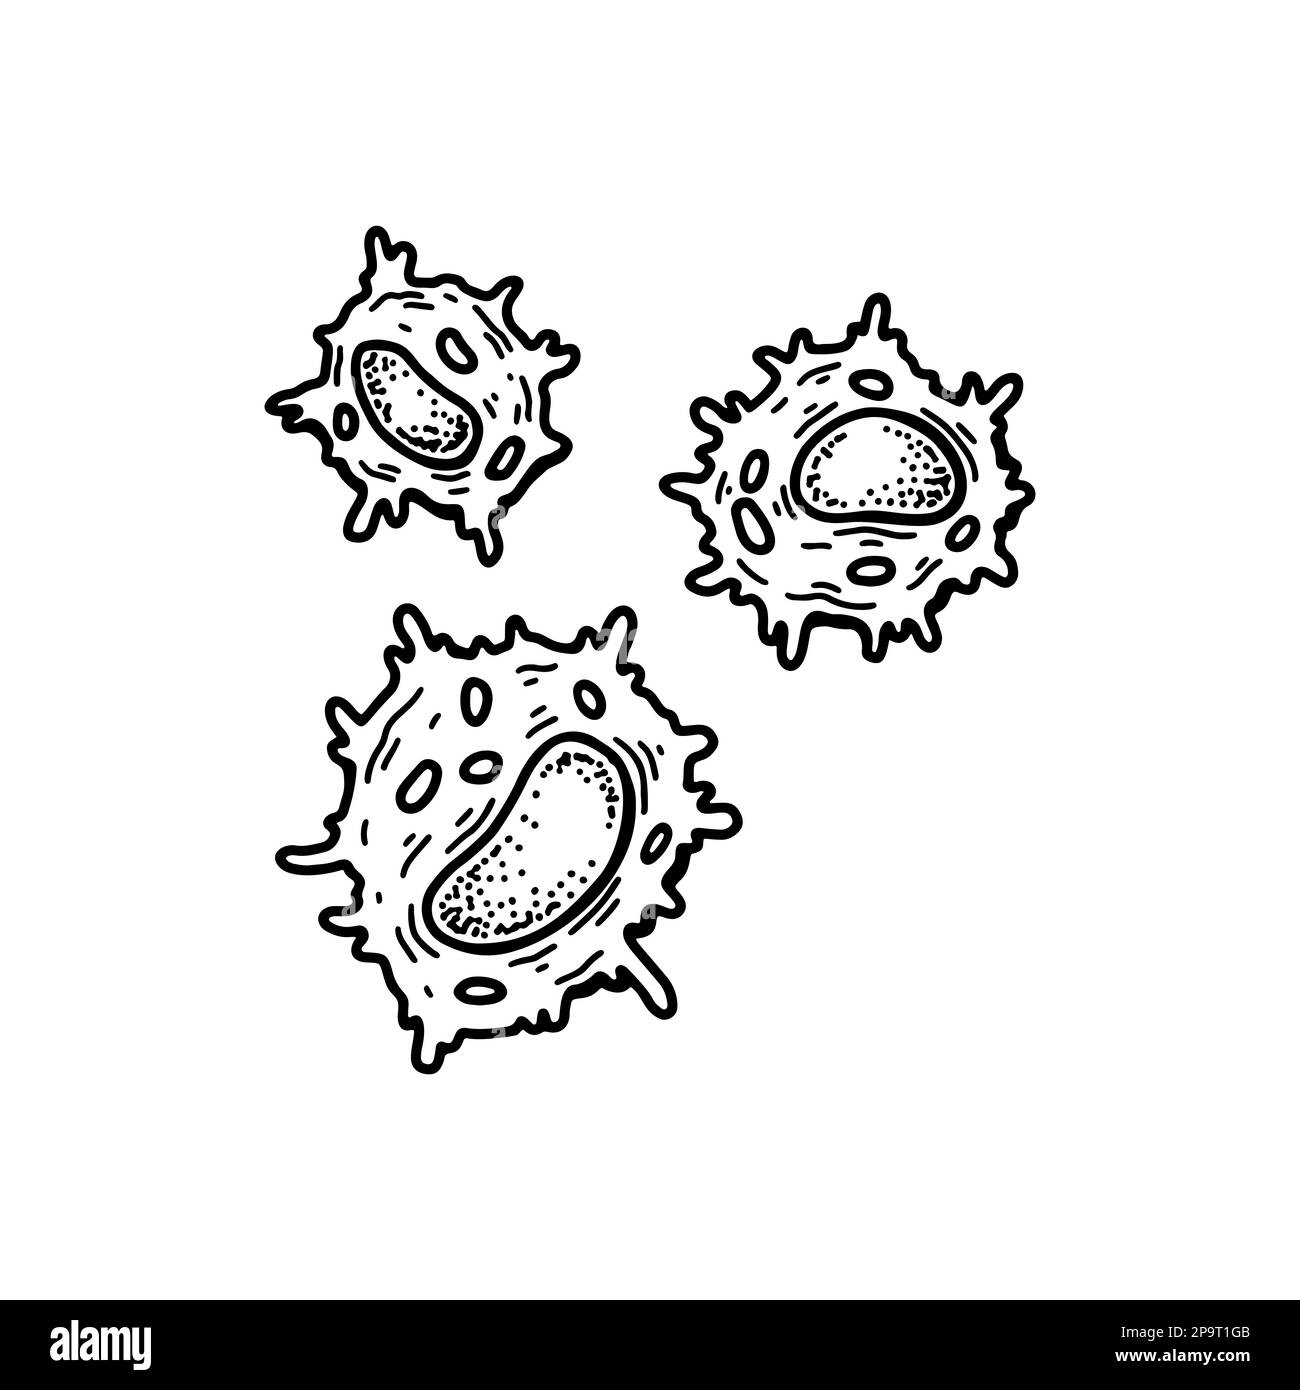 Natural killer cell isolated on white background. Hand drawn scientific microbiology vector illustration in sketch style. Adaptive immune system Stock Vector